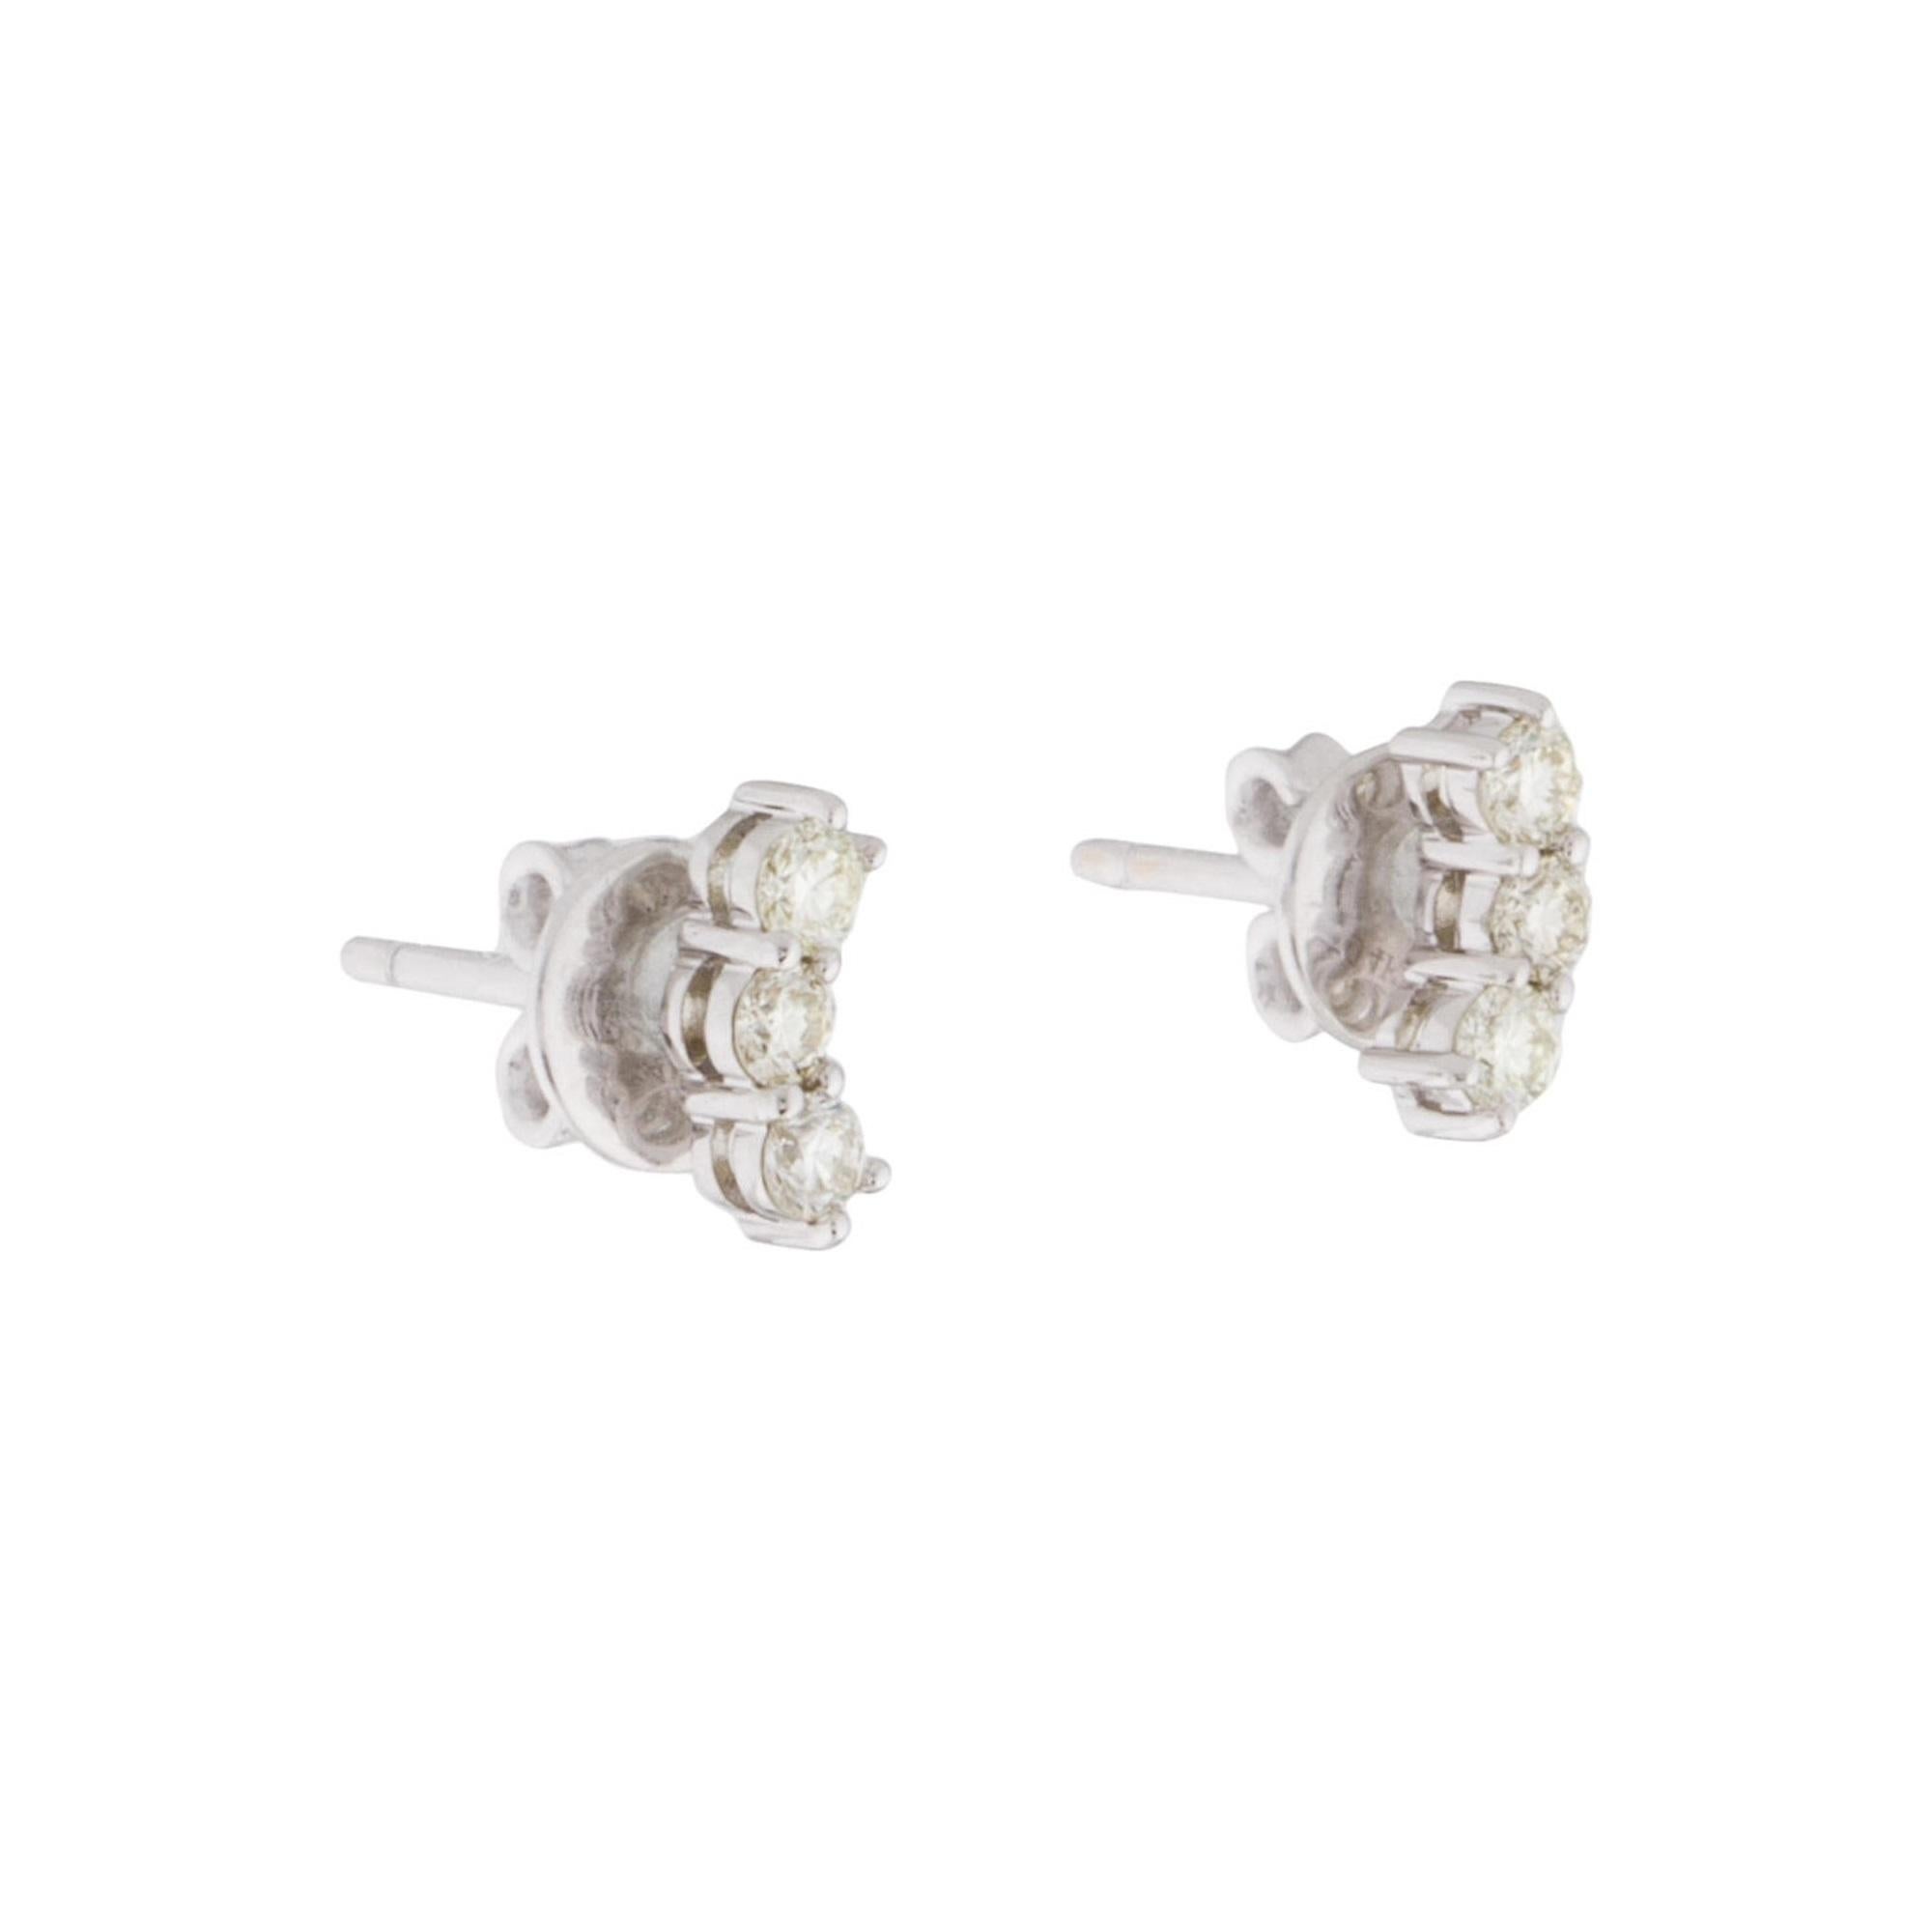 Let Stunning Sparkle Diamonds adorn your lobes!
Crafted of 14K Gold, these small and dainty Stud Earrings featuring approximately 0.30cts of White Round Natural Diamonds are a great look for everyday! Each Stud measures 1/4 of an inch. 
-14K 